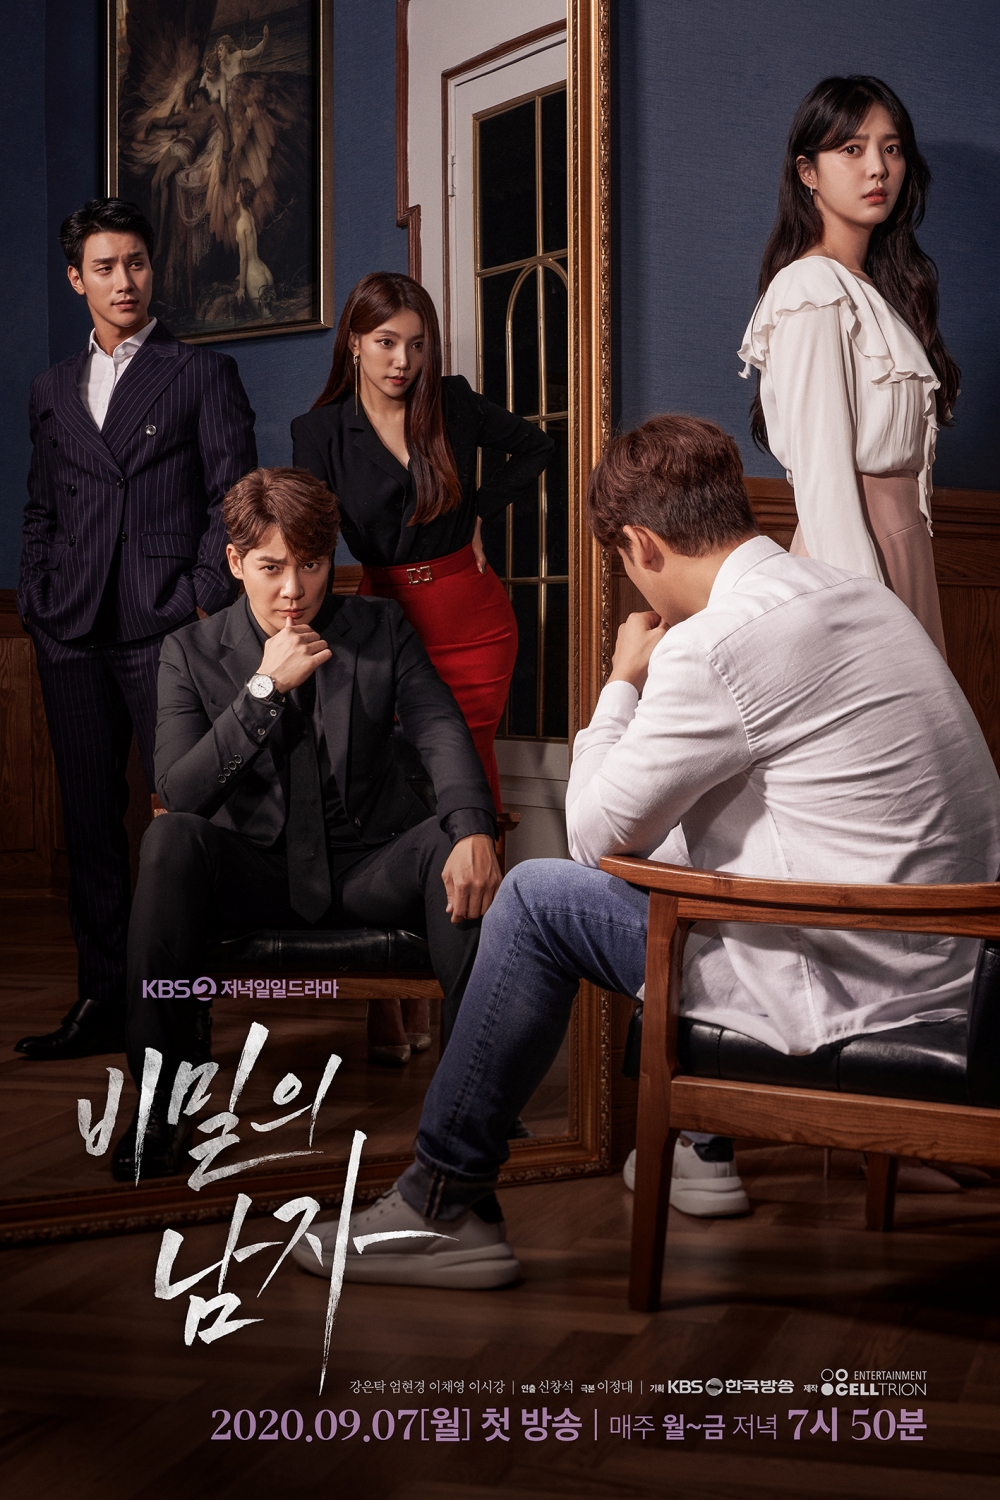 The main poster with Black and White Inversion point of Secrets Man Kang Eun-tak is revealed and attention is focused.It is raising the expectation of what kind of transformation he will show by showing the appearance of Black Eun-tak in the mirror and Baek Eun-tak in the good back.As such, the main poster, which focuses on Kang Eun-tak, the Hyun-kyung Uhm, Lee Chae-young, and the character of the four male and female characters of Ishi River, and the two posters, which suggest the tragic fate of Kang Eun-tak and Hyun-kyung Uhm,KBS 2TVs new evening drama The Man of Secret (playplayed by Lee Jung-dae and director Shin Chang-seok), which is scheduled to be broadcast on September 7, unveiled a two-person poster with four actors, Kang Eun-tak and Hyun-kyung Uhm, on August 31, seven days before the first broadcast.Secrets Man is a drama depicting a man who has an intelligence of seven years in an accident and rushing for revenge in the face of a miracle at the threshold of death.The love and desire of the two women surrounding him, and the life of the characters will present an indicator of a different daily drama.The main poster, which contains four characters to drag the Man of Secret, contains the contrast and cancer of these lives and the character of Character.A typhoon wearing a black suit in a mirror and wearing a high-end watch around a Lee Tae-pung (Kang Eun-tak), a Jaebeol-nam car (Lee Si-gang), a amuse Han Yura (Lee Chae-young), a white shirt outside the mirror, jeans, and a blue-jeong style by a typhoon in sneakers (Yu-Jeong) The appearance of the Hyun-kyung Uhm) is impressive.Especially, the appearance of the typhoon, which has been reversed from the mirror, causes curiosity.Typhoon is an Innocence youth who has become seven years of intelligence in childhood accidents, because the typhoon in the mirror is staring at the front with intense eyes that are far from Innocence.Yu-Jeong and the body in the eye of Seo-joon in the mirror are tilting toward the typhoon and Seo-joon, but Yuras gaze staring out of the mirror attracts attention.Yura is a red mini skirt that emphasizes being an ambitious character.In addition, the two men and women who face the Innocence First Love 2 Poster with the typhoon and Yu-Jeong raise their curiosity by raising the sad feeling that they do not know.Typhoons dressed in a finely dressed grey-toned best as points and Yu-Jeong in a white blouse stand without looking at each other.Especially the shadow on the face of the typhoon as if he had hidden something makes him wonder about his future.Yu-Jeongs eyes and two different peoples eyes, which have lost their place, are saddened by suggesting a tragic fate in front of 200% purity First Love men and women.The man of Secret explained, The main character of the four male and female protagonists, the situation they are in, the relationship to be unfolded intensively, and the tragic fate of the two-man Poster was implied.Please expect Kang Eun-taks black and white transformation, which is also the key point of the main poster.Also, look forward to the Secret Man, which will be interesting through various episodes and characters stories, how Kang Eun-tak - Hyun-kyung Uhm First Love will show in a sad situation.Im asking for a lot of support, he said.On the other hand, Secrets Man with Kang Eun-tak, Hyun-kyung Uhm, Lee Chae-young and Ishi River will be broadcasted on KBS 2TV on September 7th.iMBC  Photo KBS